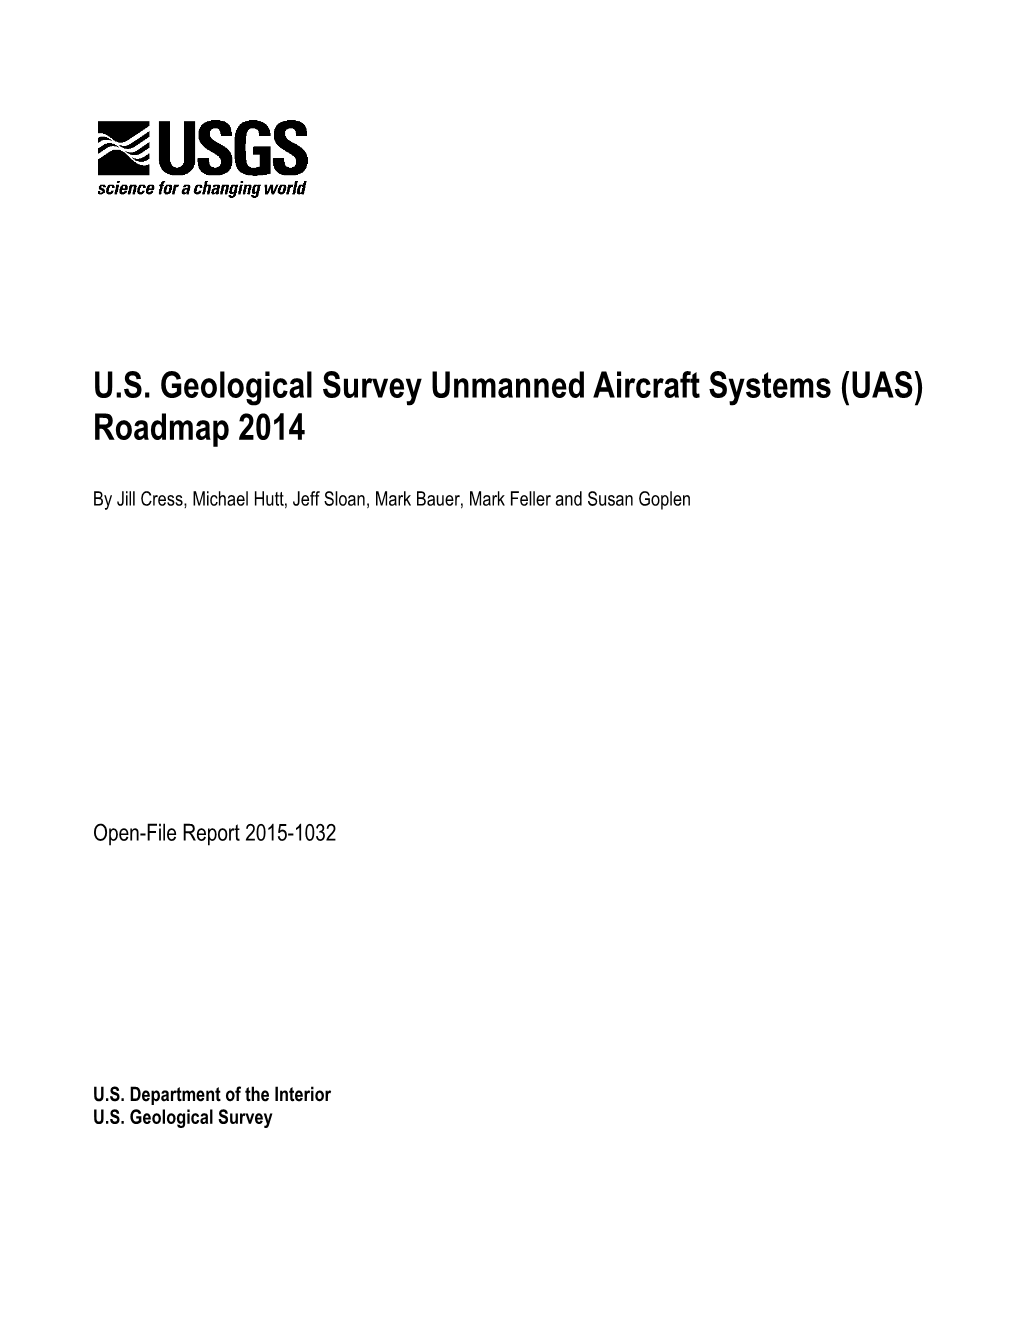 US Geological Survey Unmanned Aircraft Systems (UAS) Roadmap